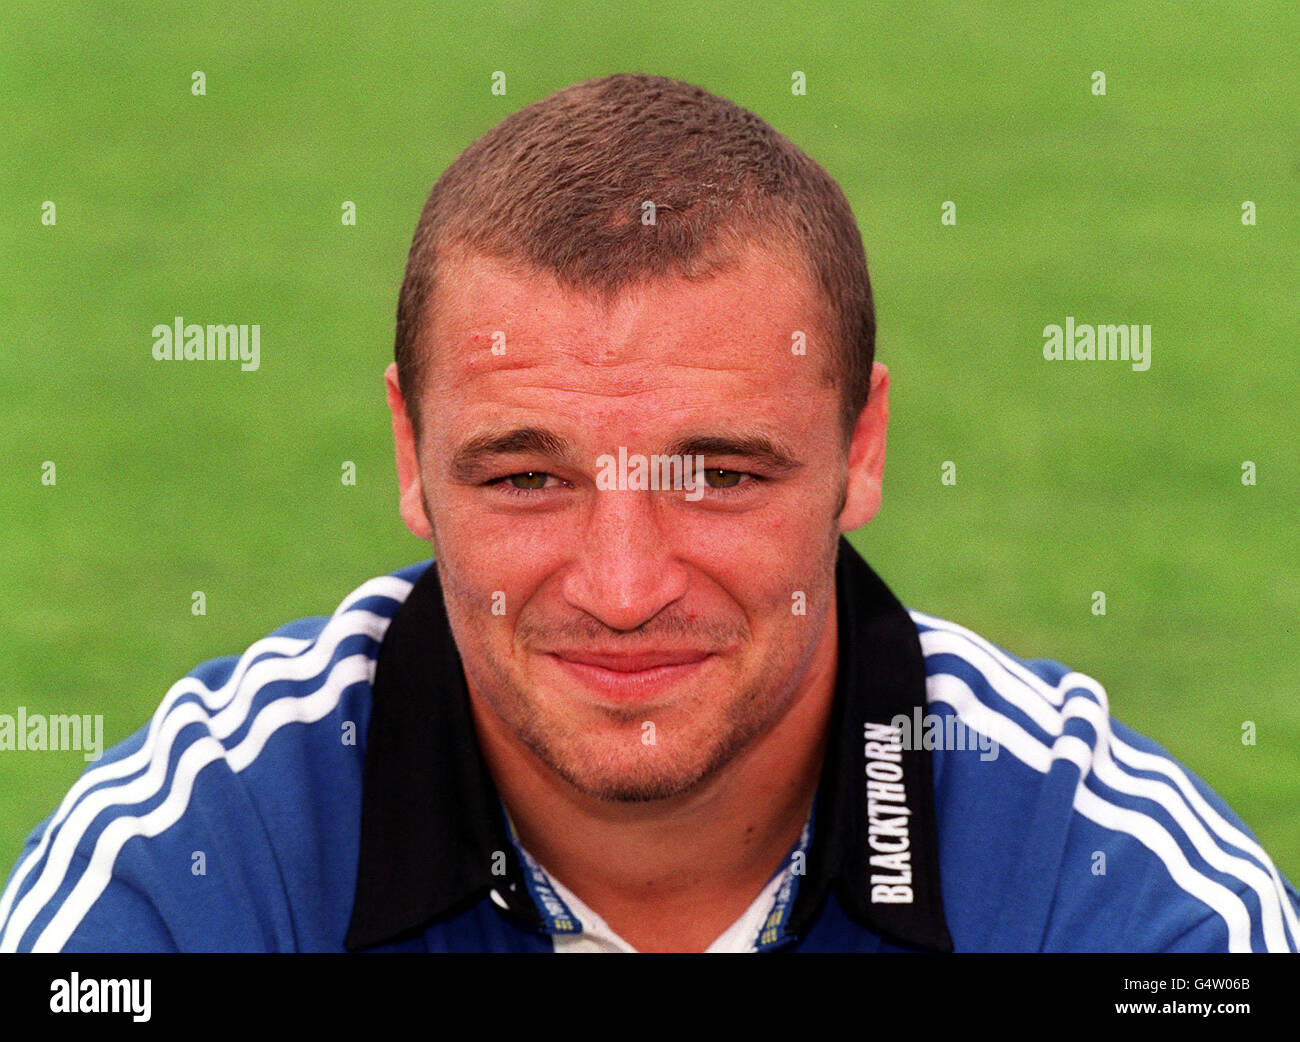 Christopher Horsman of Bath RUFC, Rugby Union Football Club. Stock Photo